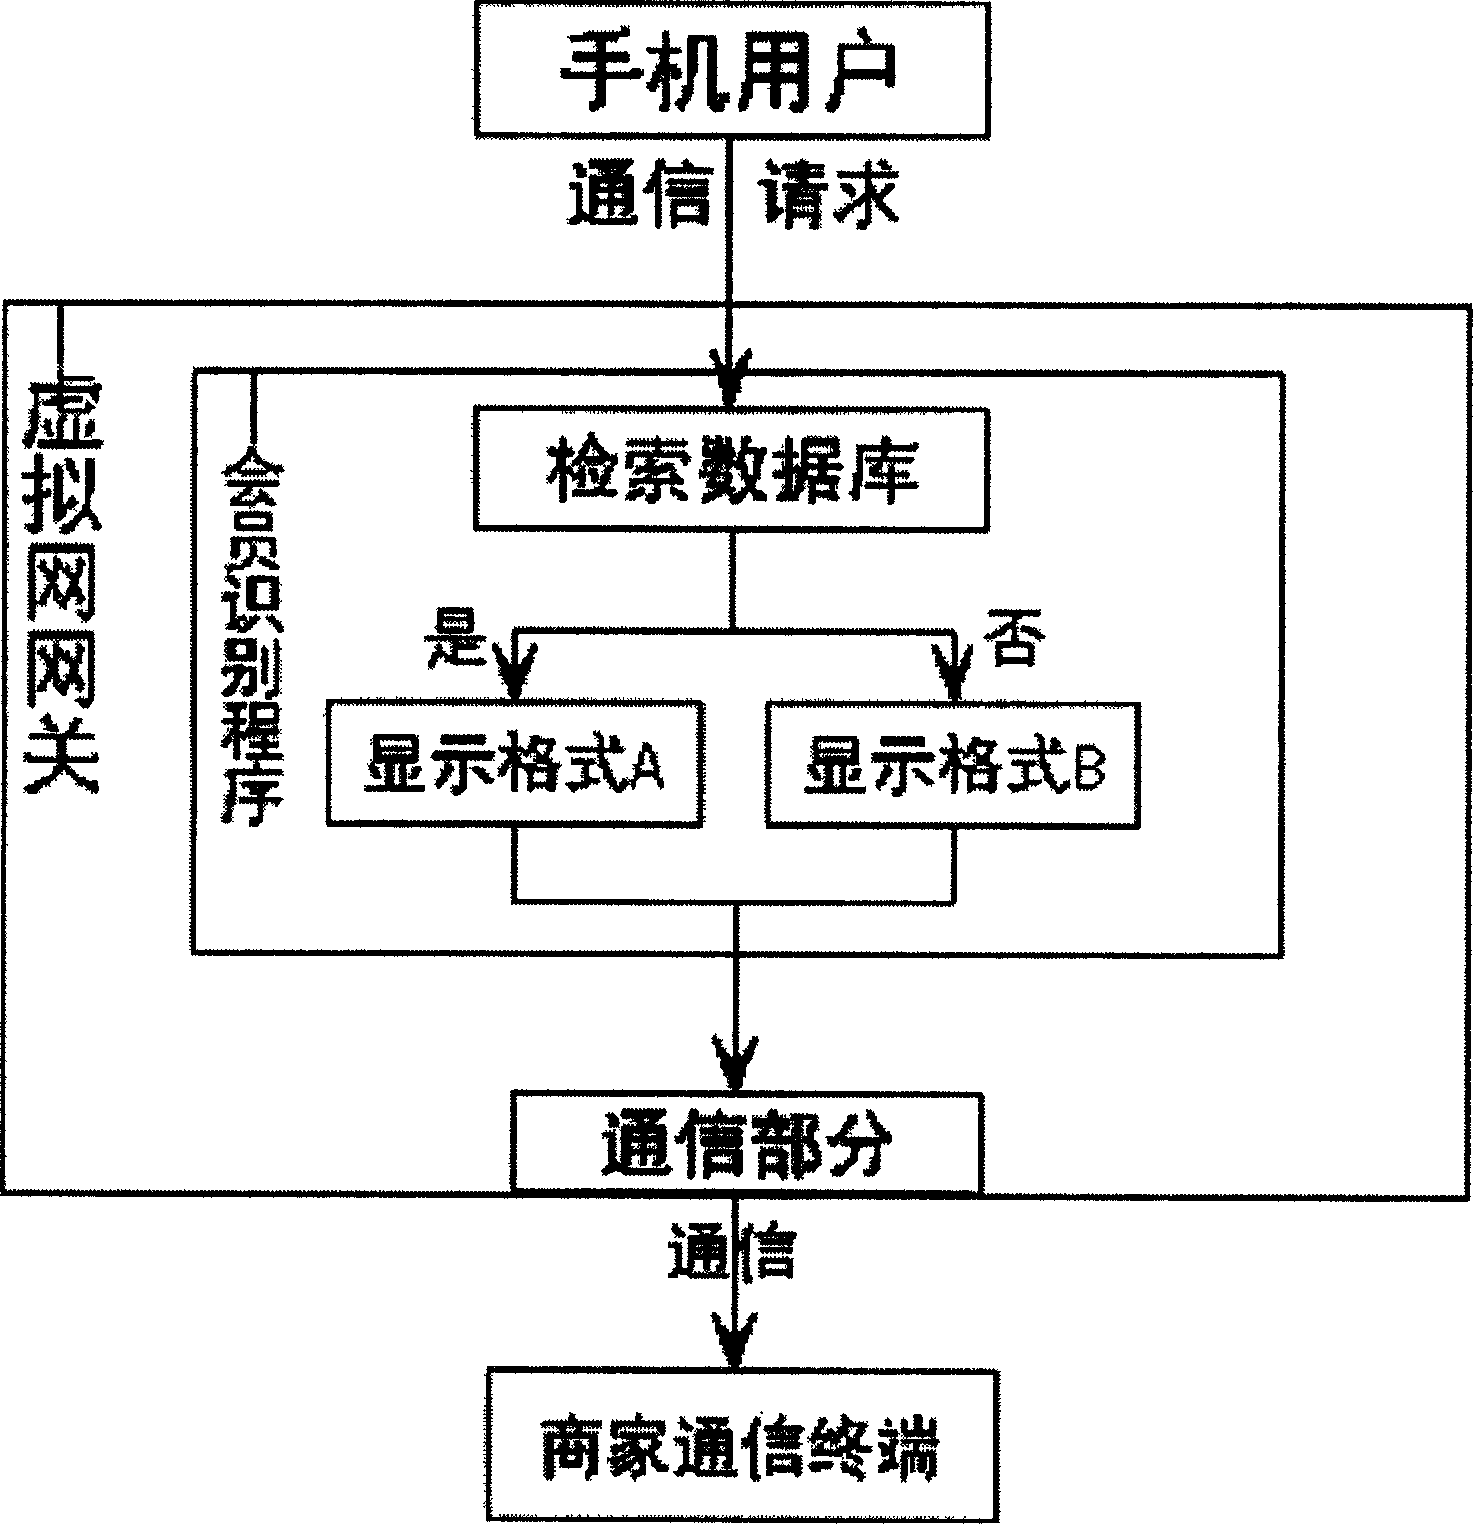 Method for realizing associator identity identification in intelligent communication network by using mobile phone number